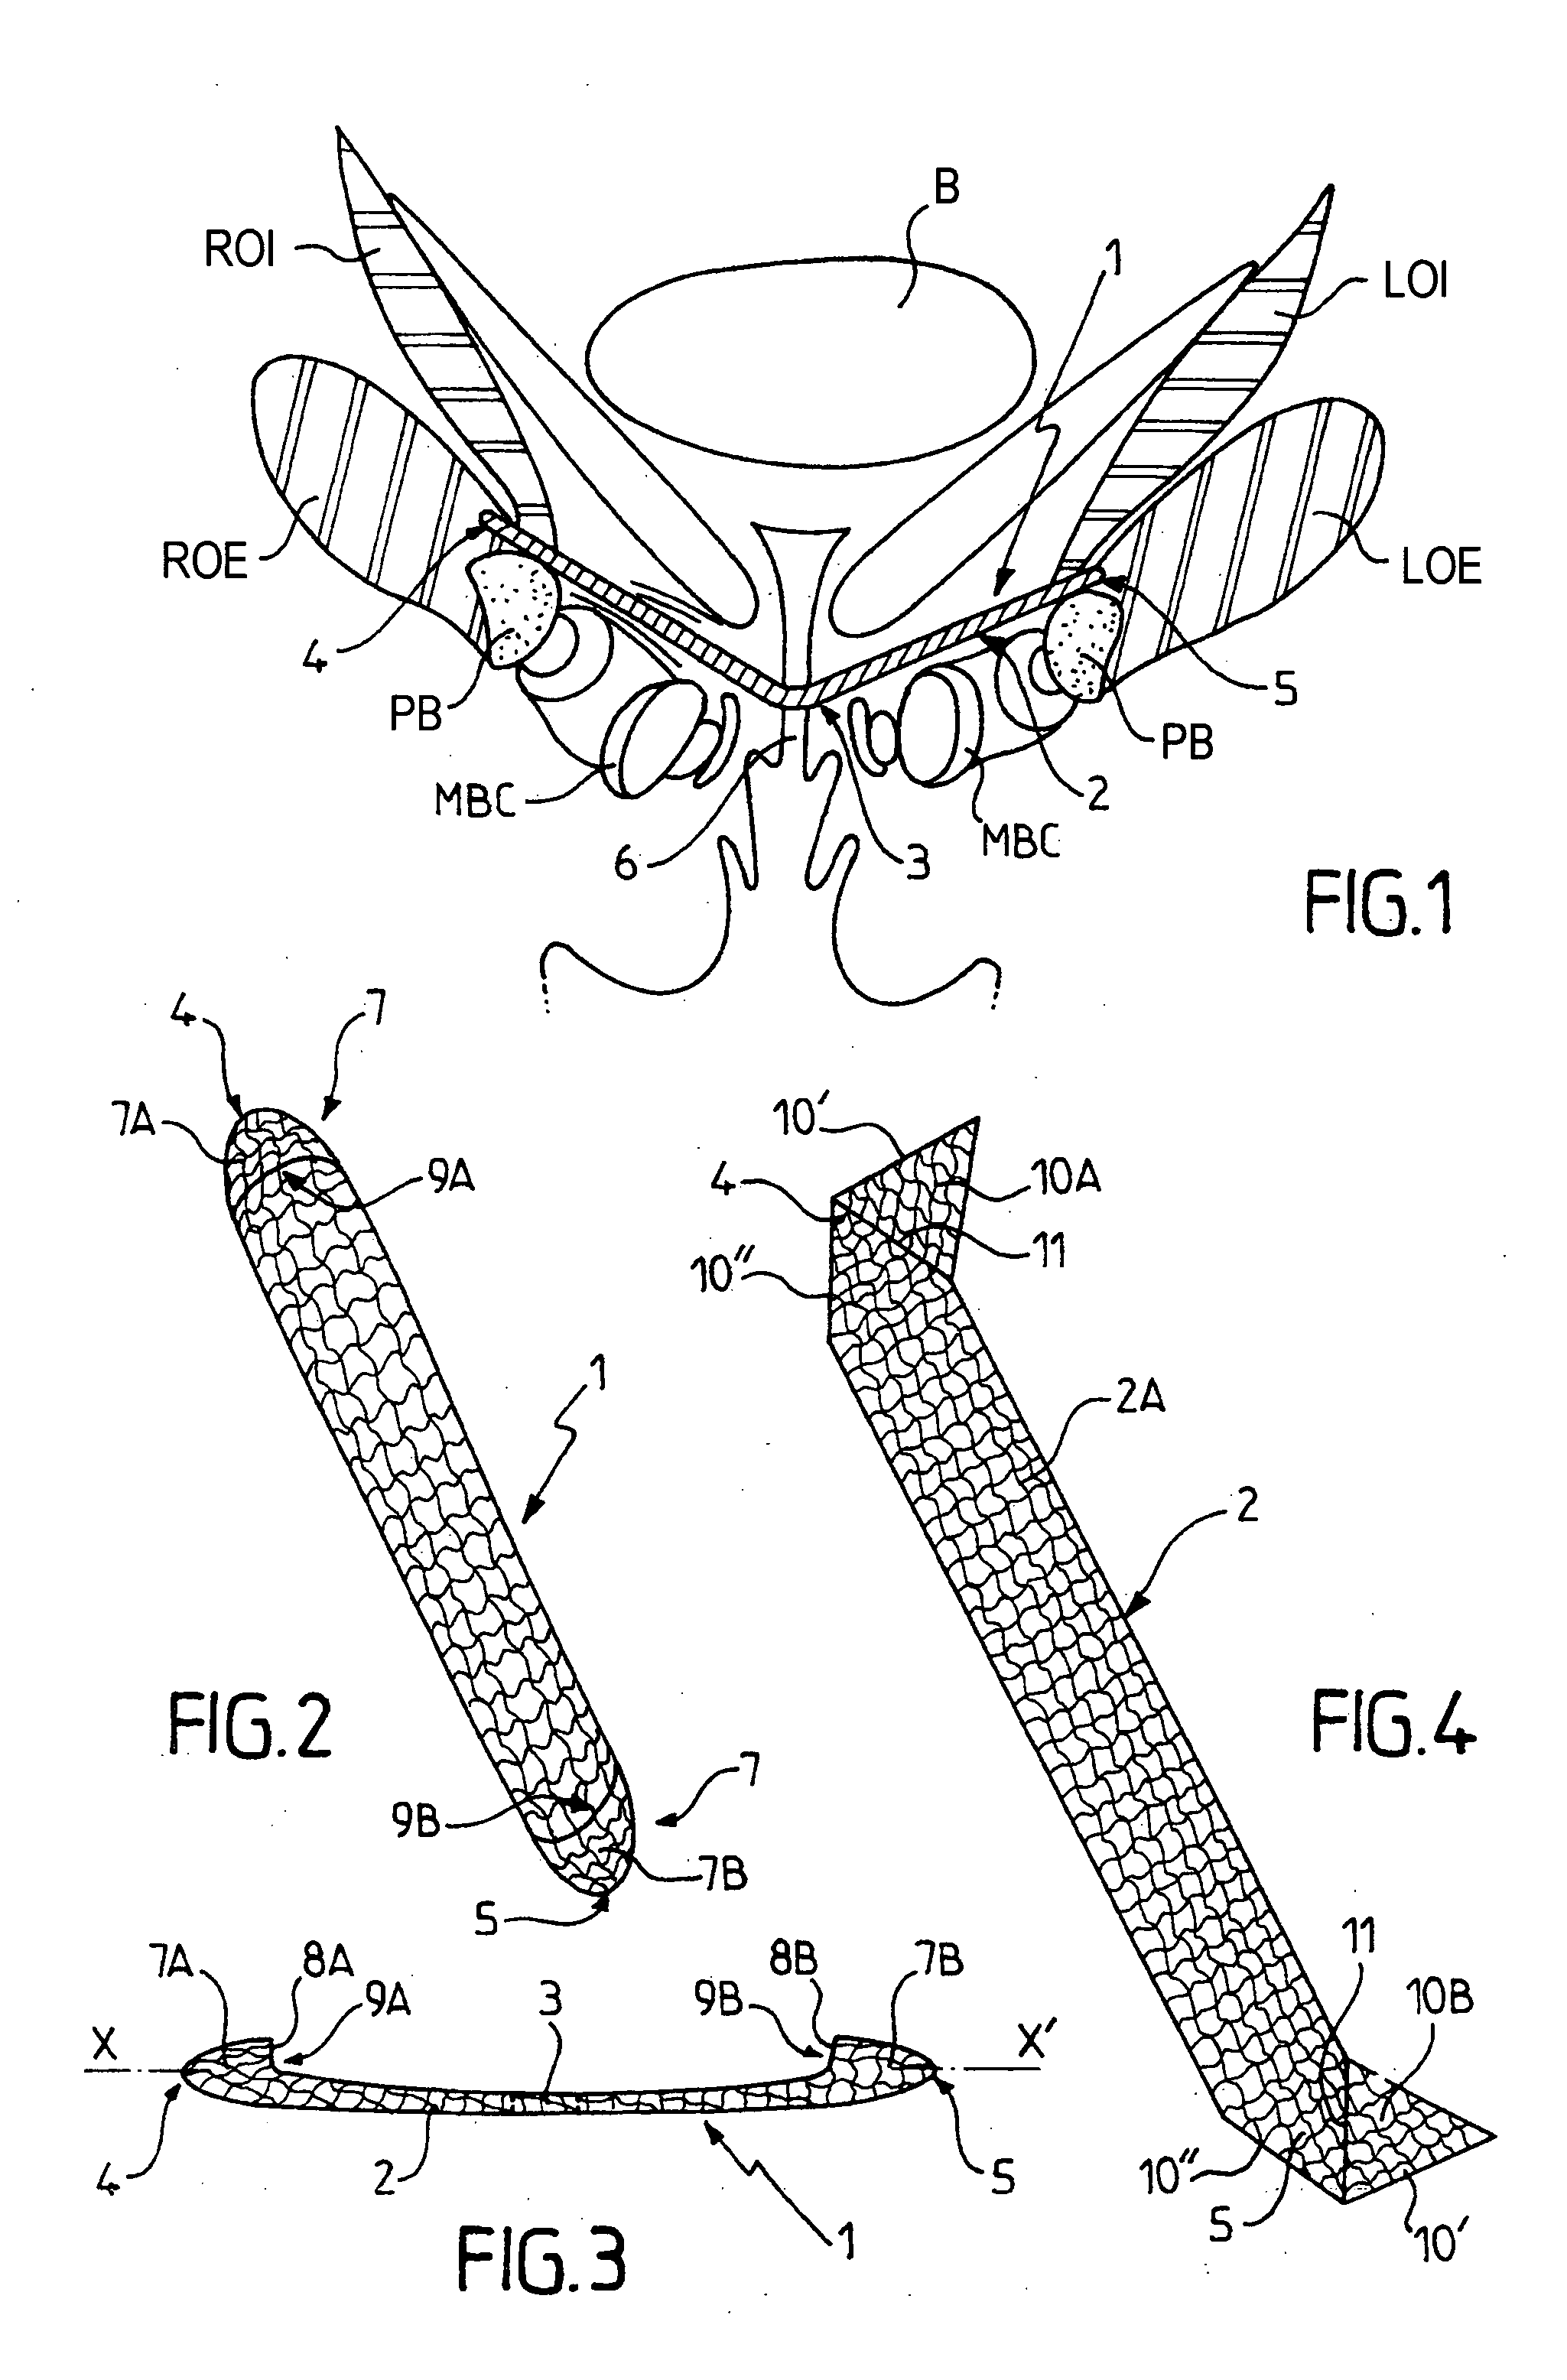 Prosthetic implant for sub-urethral support, an instrument, an insertion kit, and a surgical method for implanting it